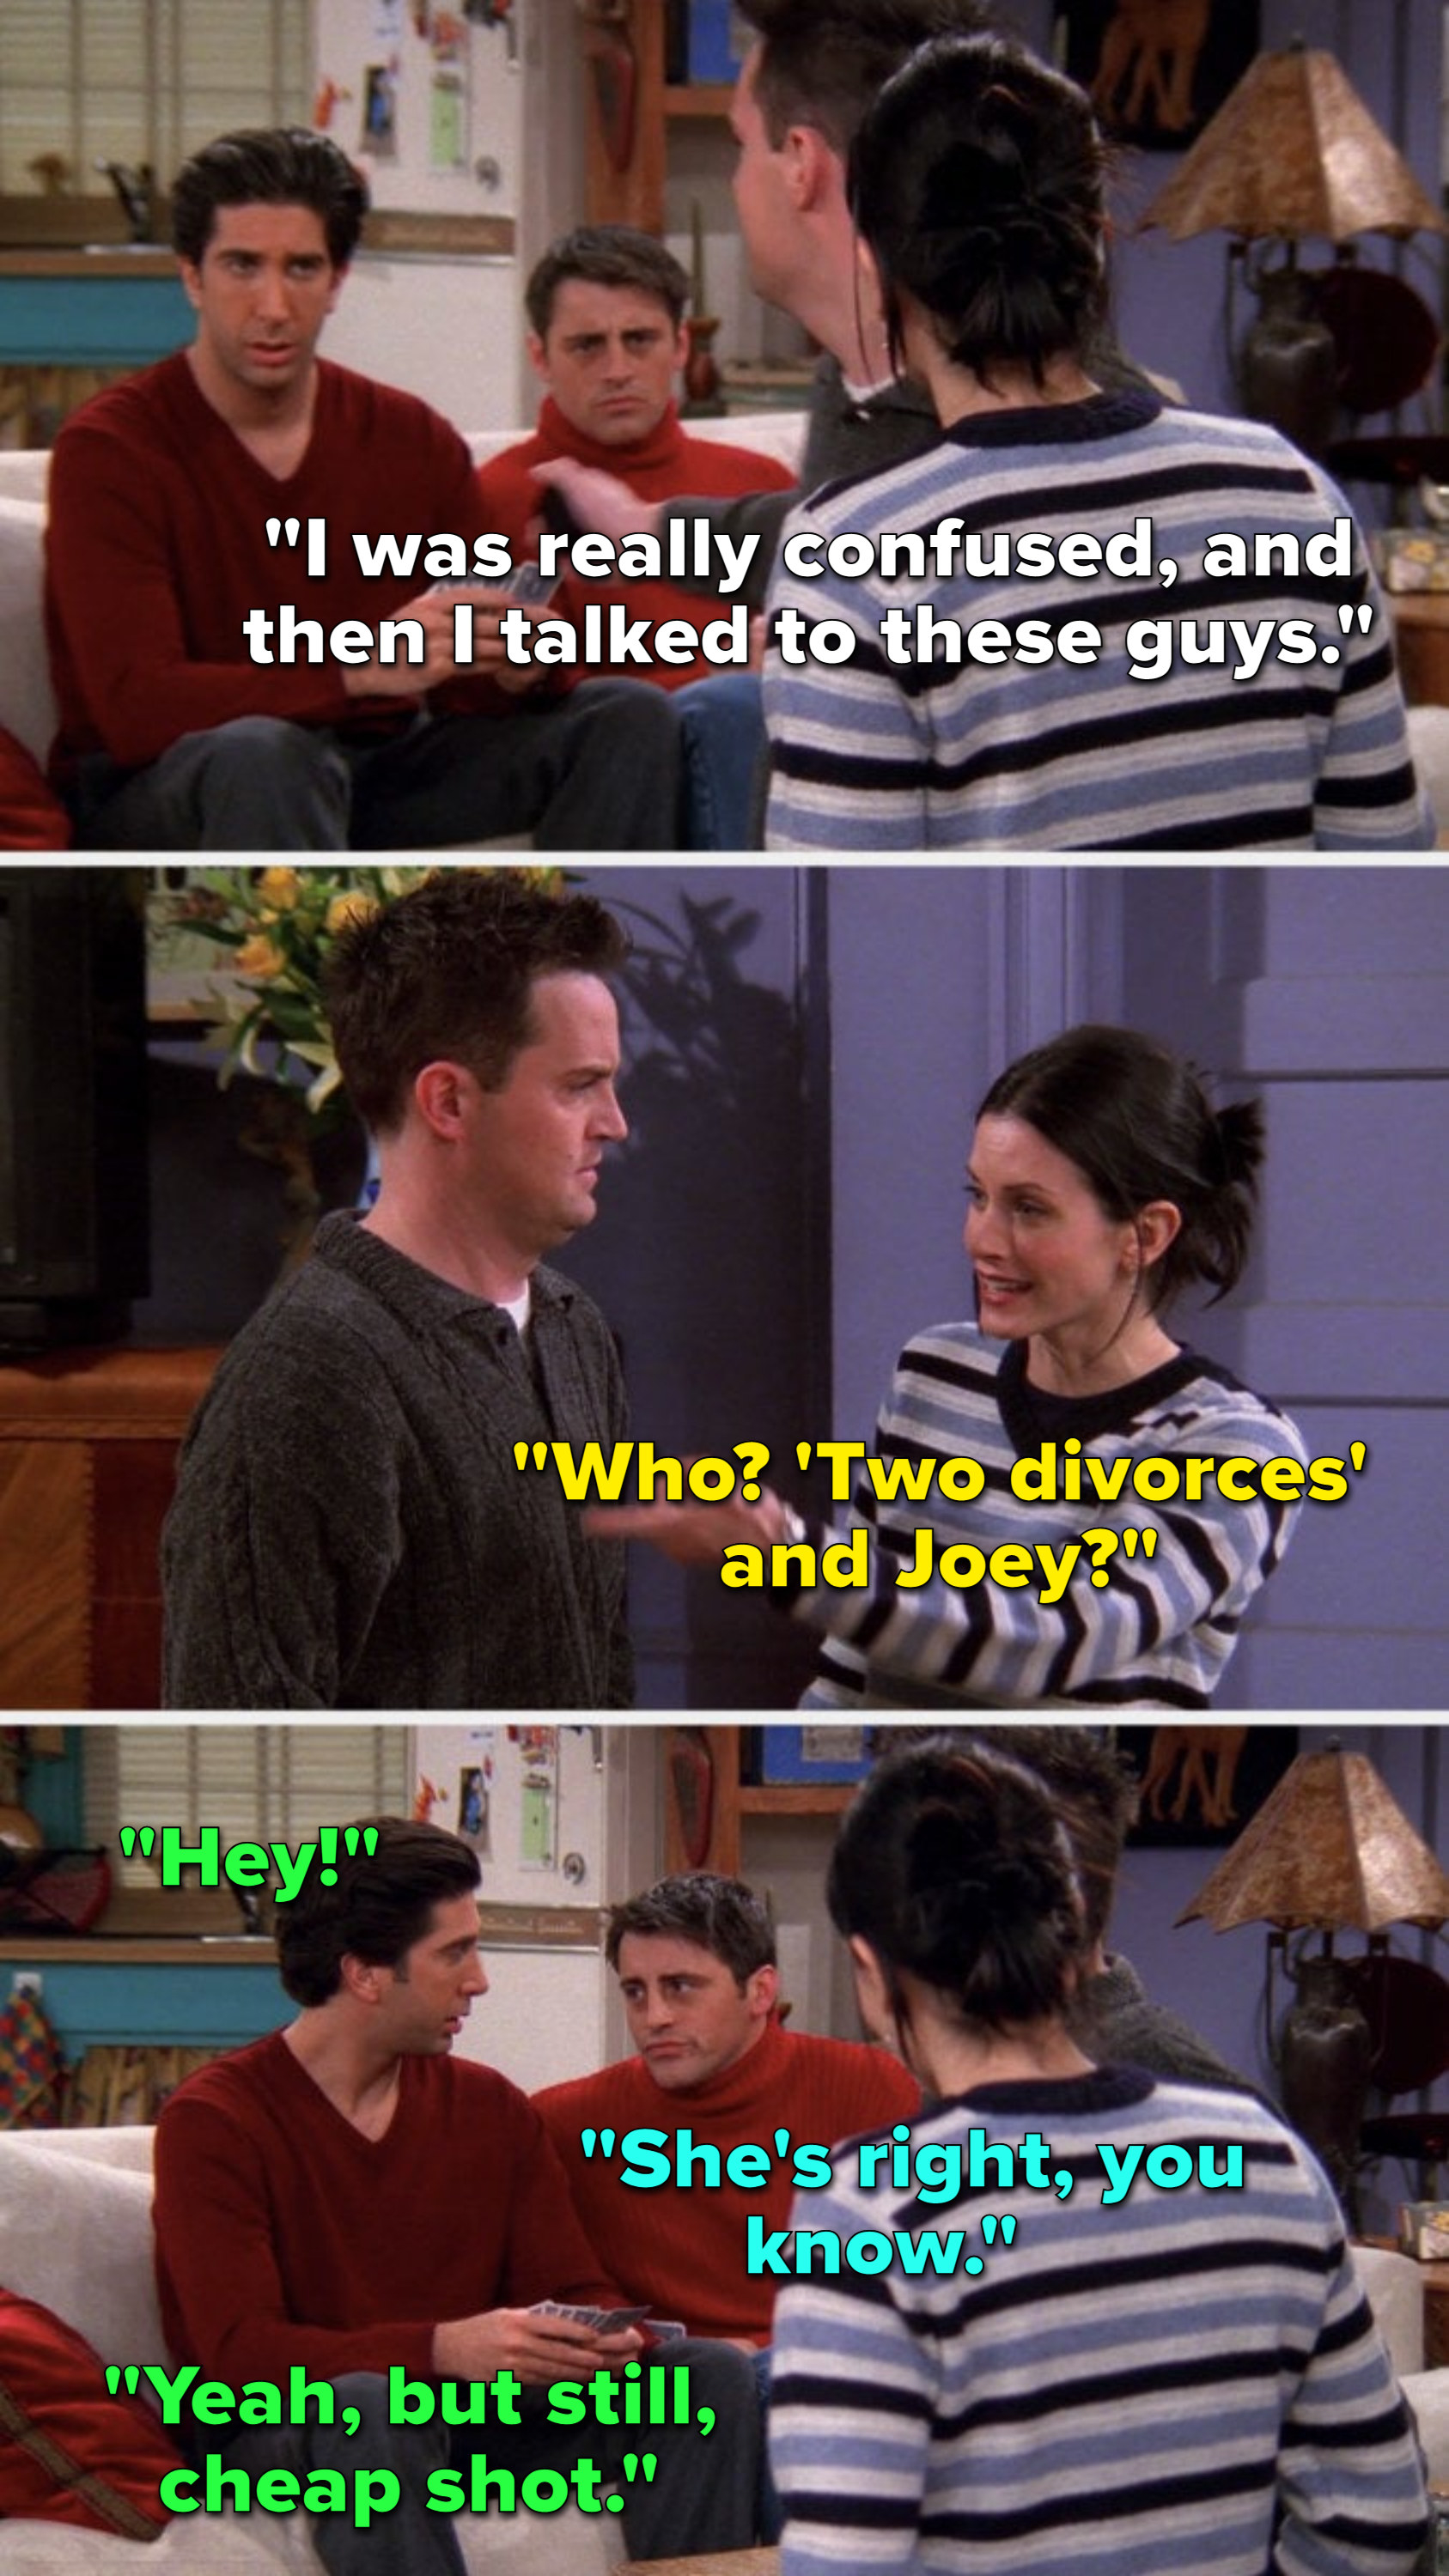 Chandler says, &quot;I was really confused, and then I talked to these guys,&quot; Monica says, &quot;Who, &#x27;two divorces&#x27; and Joey,&quot; Ross says, &quot;Hey,&quot; Joey says, &quot;She&#x27;s right, you know,&quot; and Ross says, &quot;Yeah, but still, cheap shot&quot;